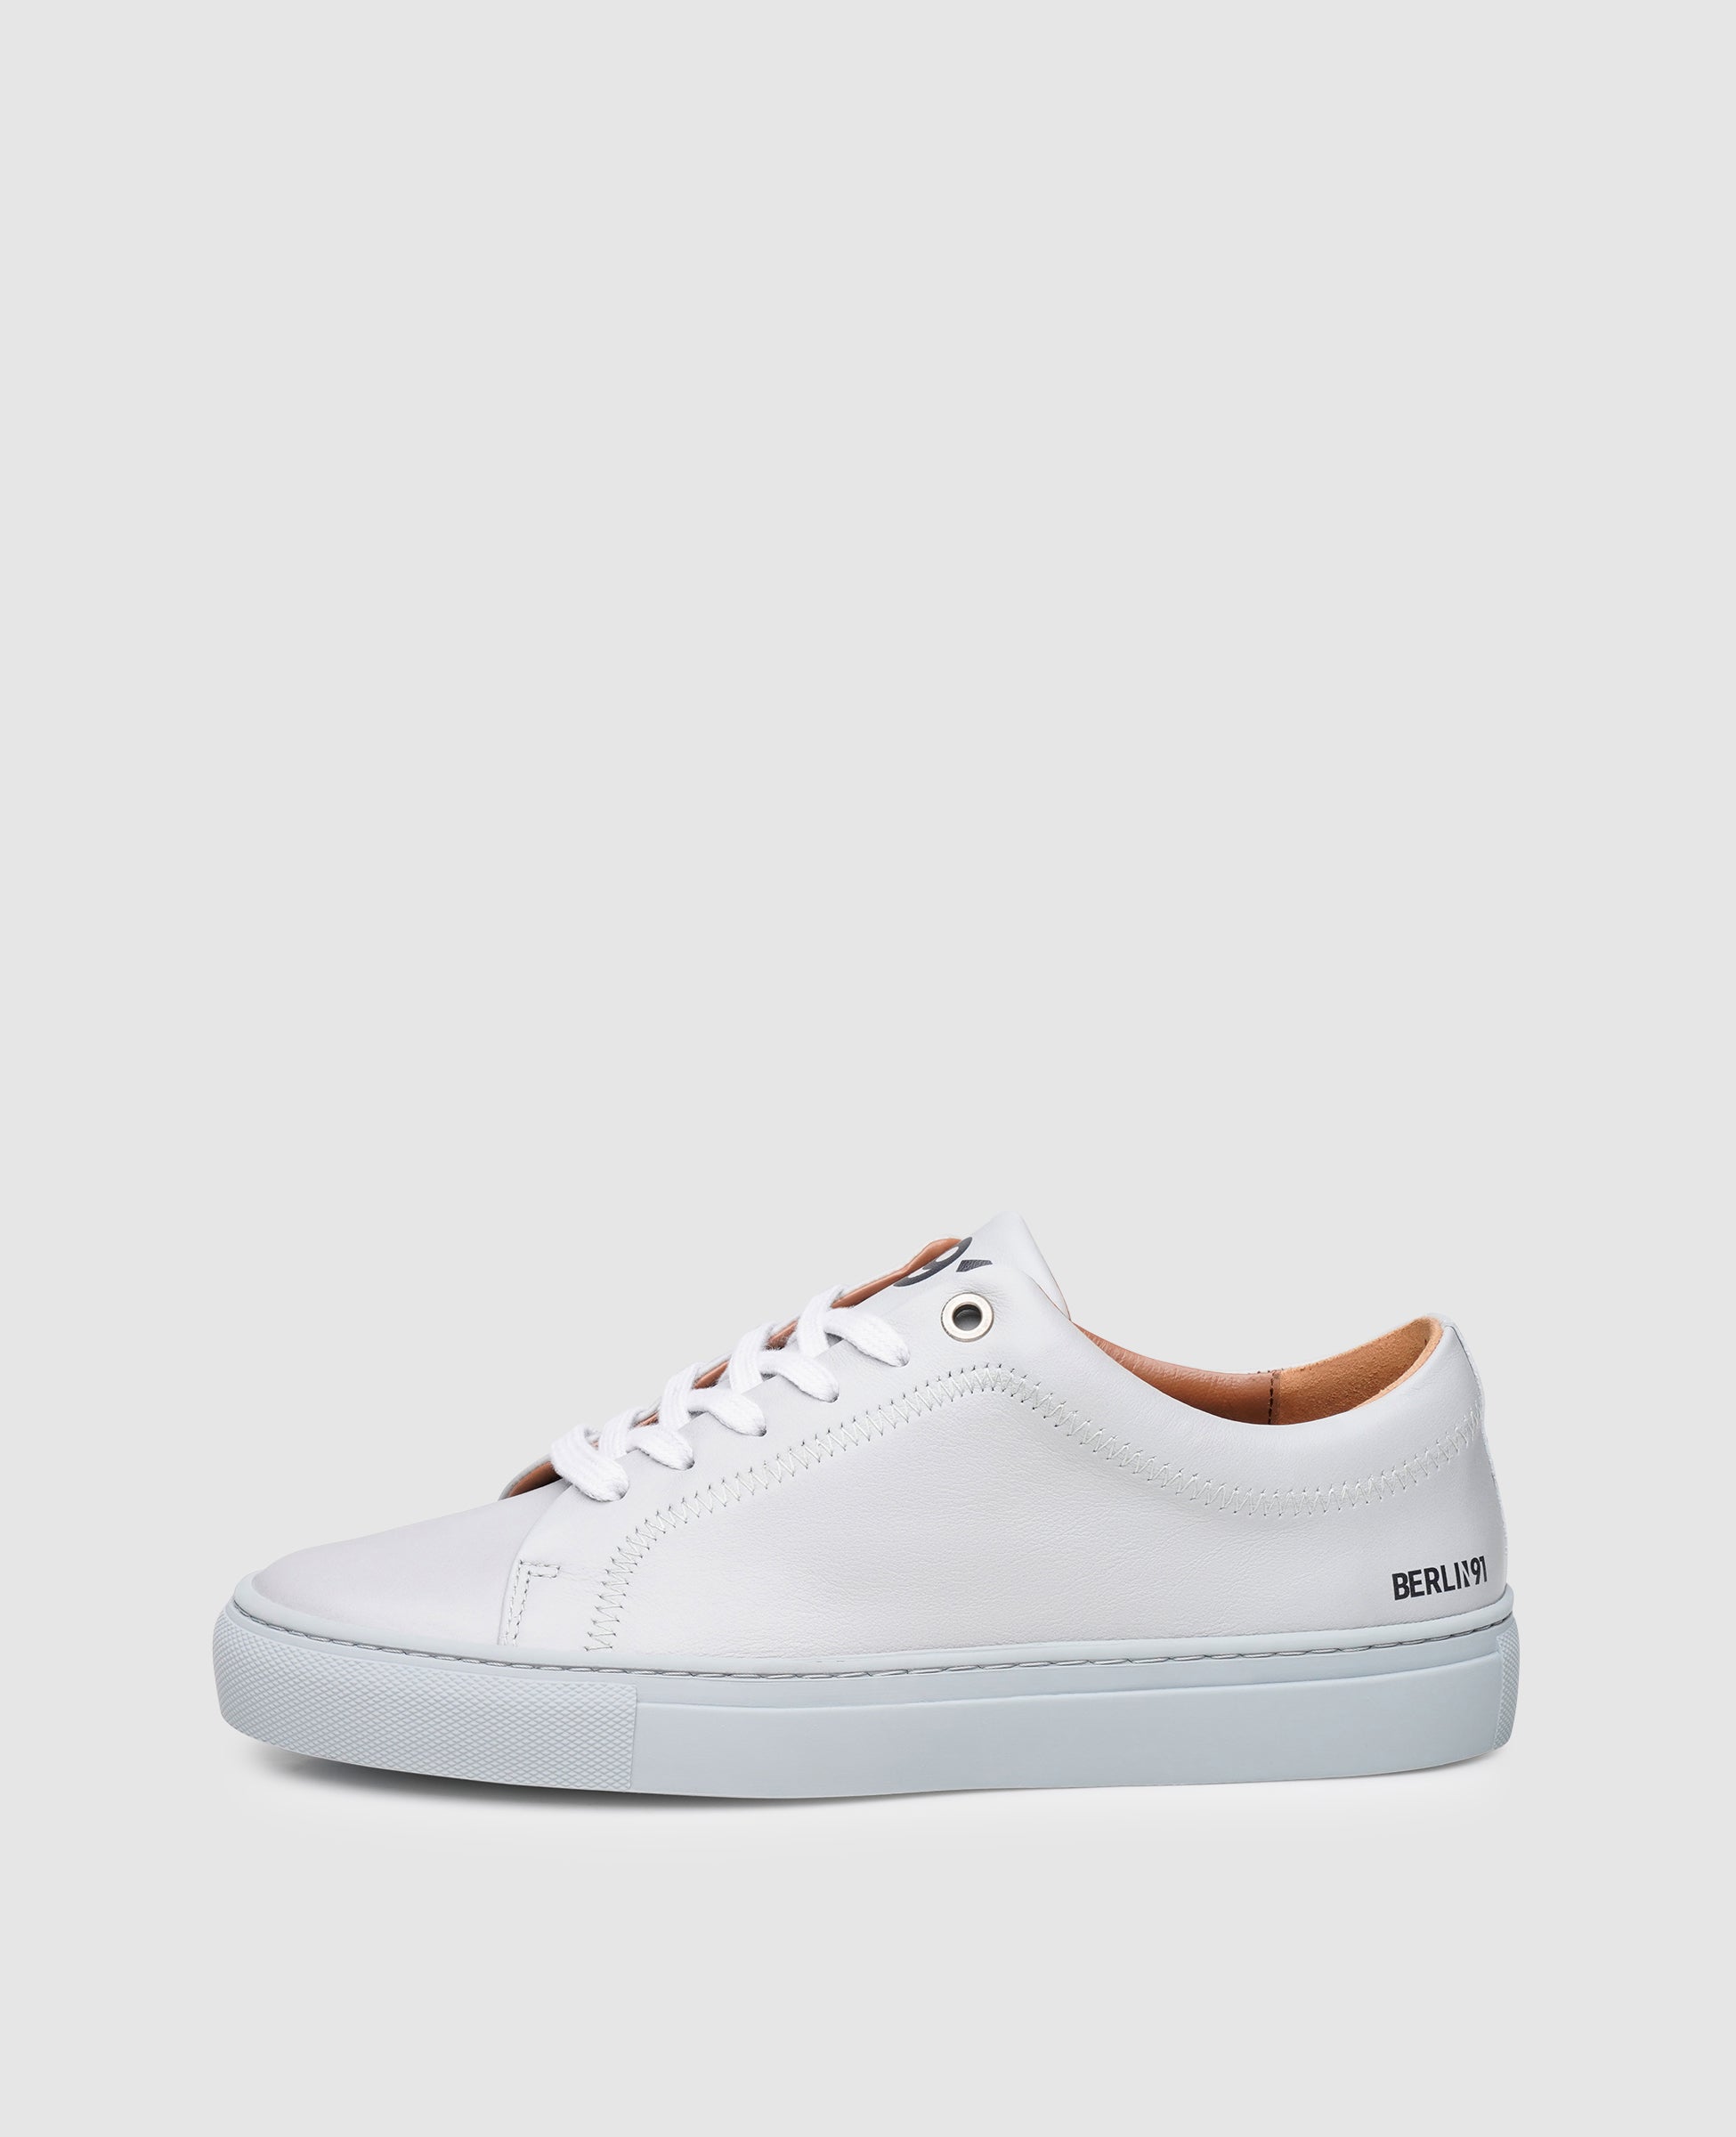 Calfskin Leather Trainer for Women|Berlin N91 bei SHOEPASSION | Shoepassion